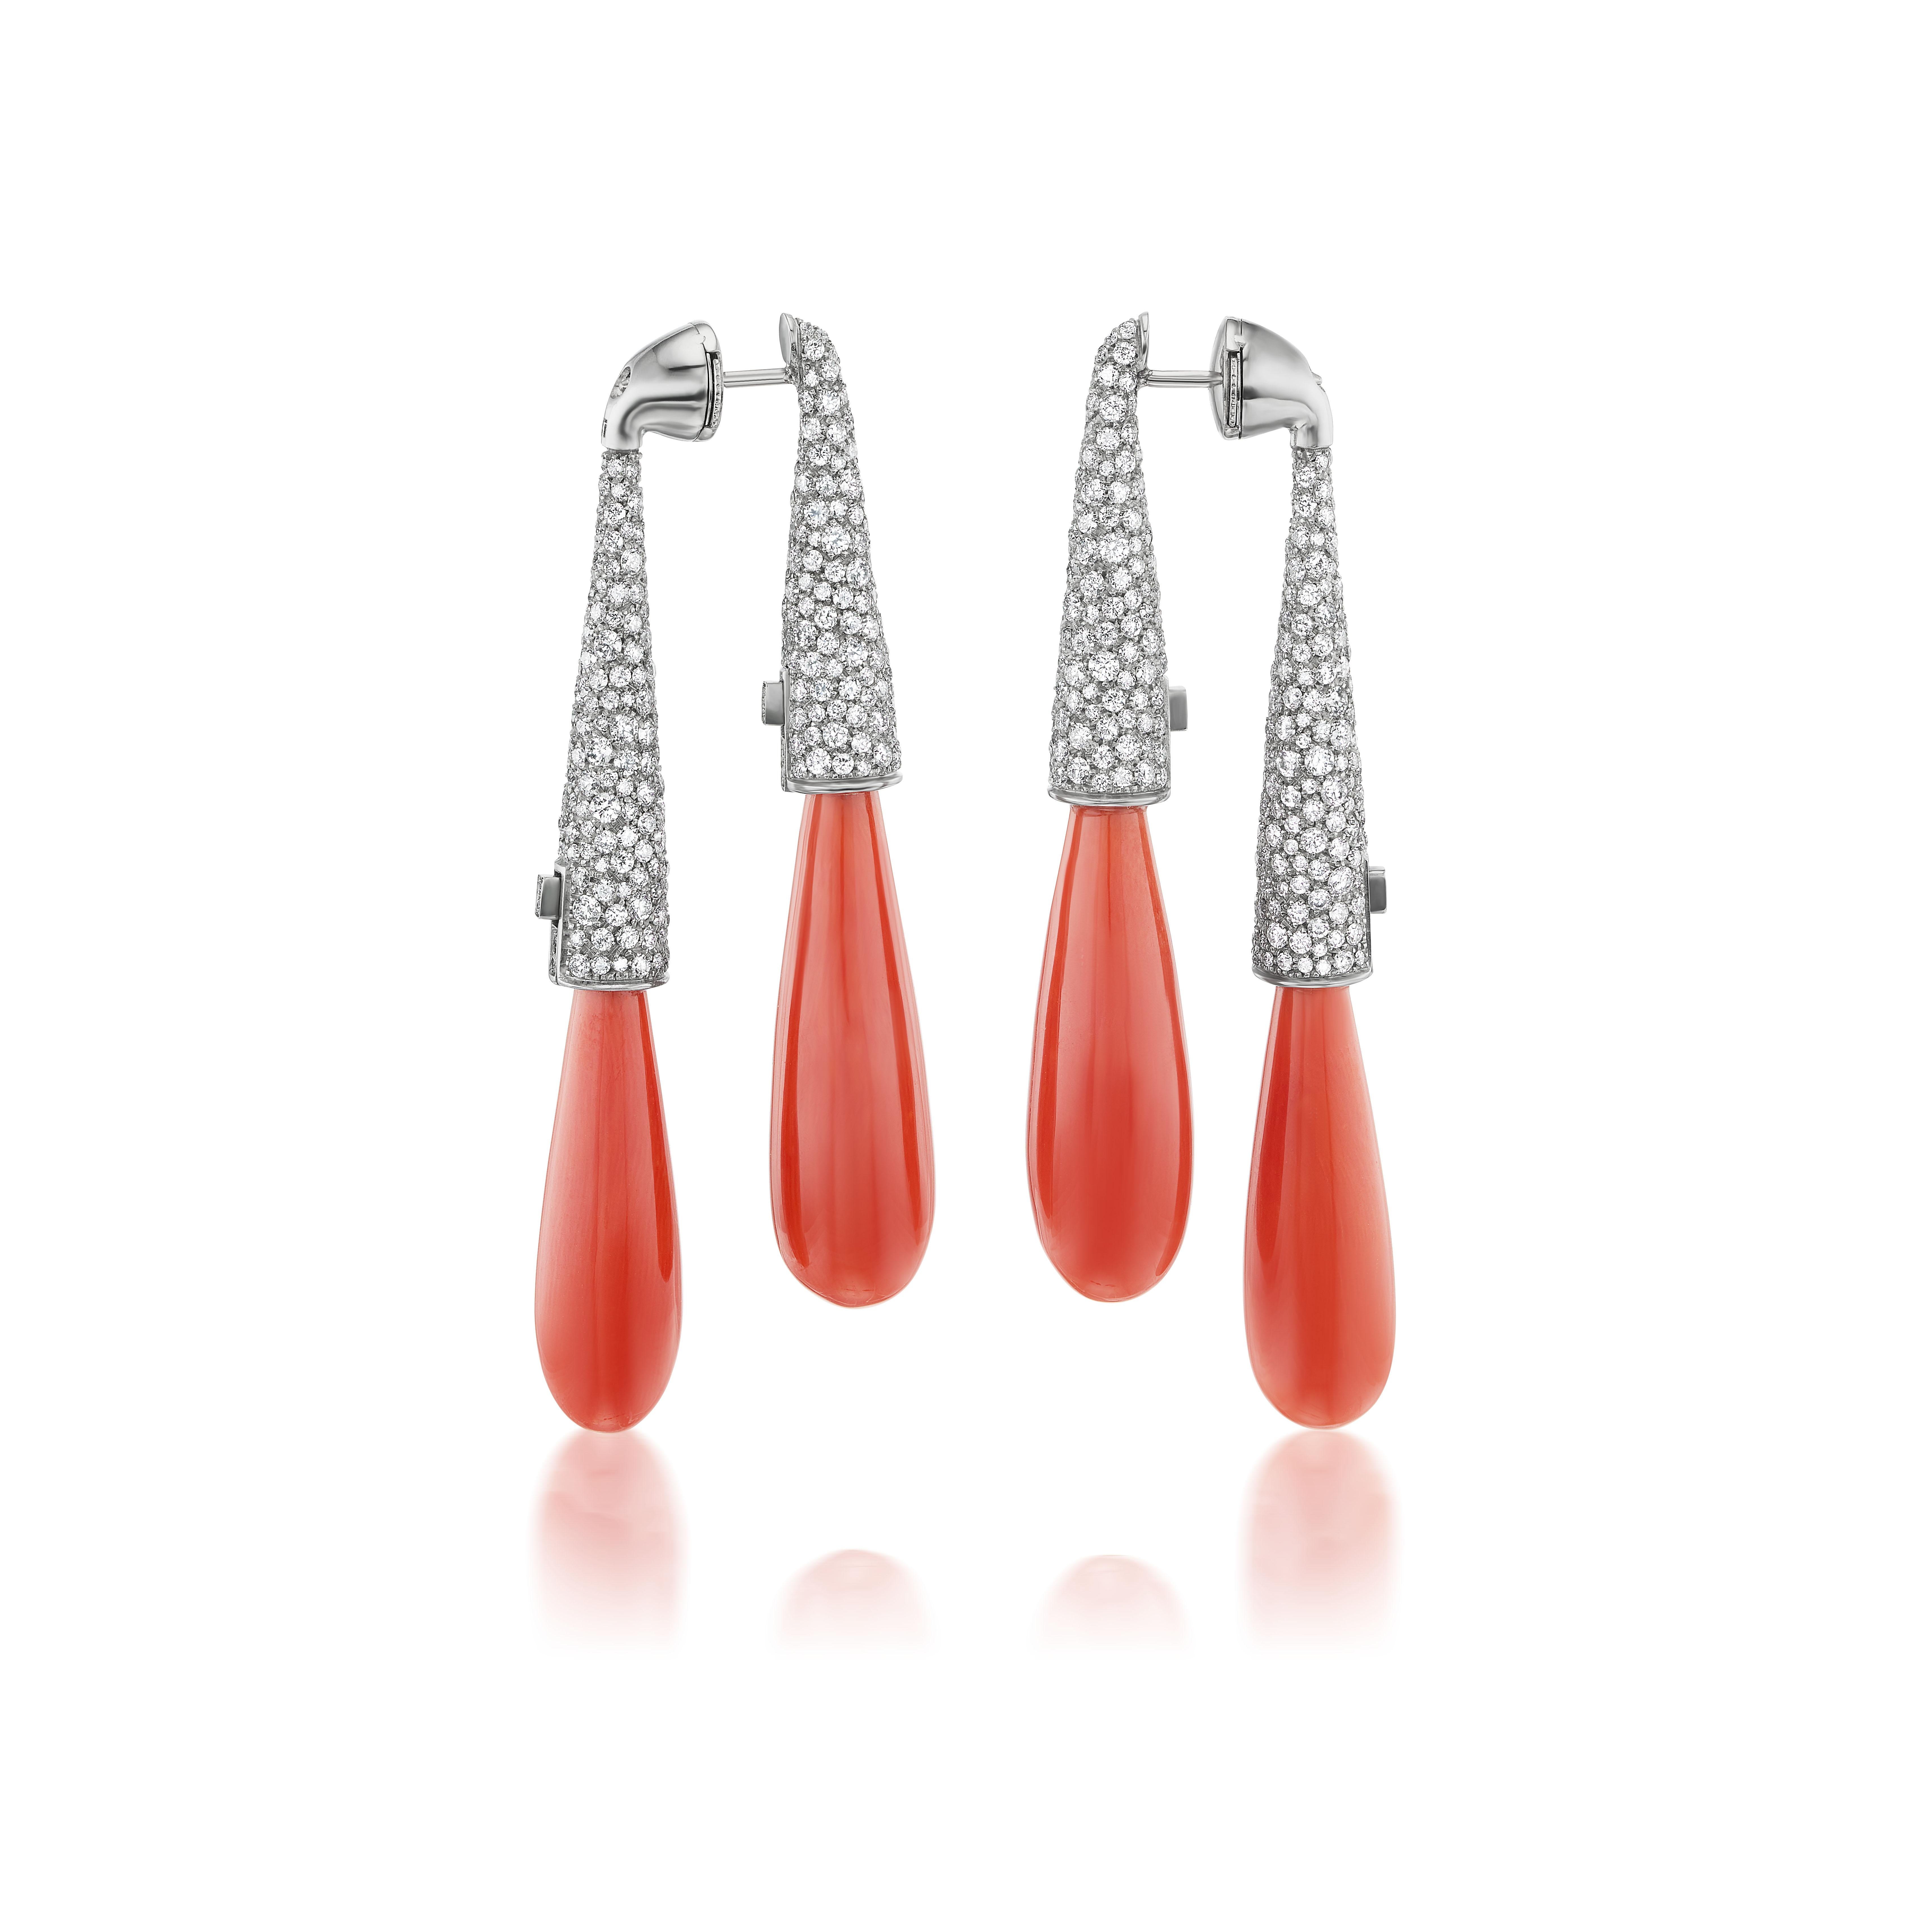 An absolutely unique design, these earrings are true showstoppers. The larger drops hang from behind the ear, while the perfectly matched smaller drops are in front. In fact, it's almost like wearing two pairs of earrings at once.  However the metal